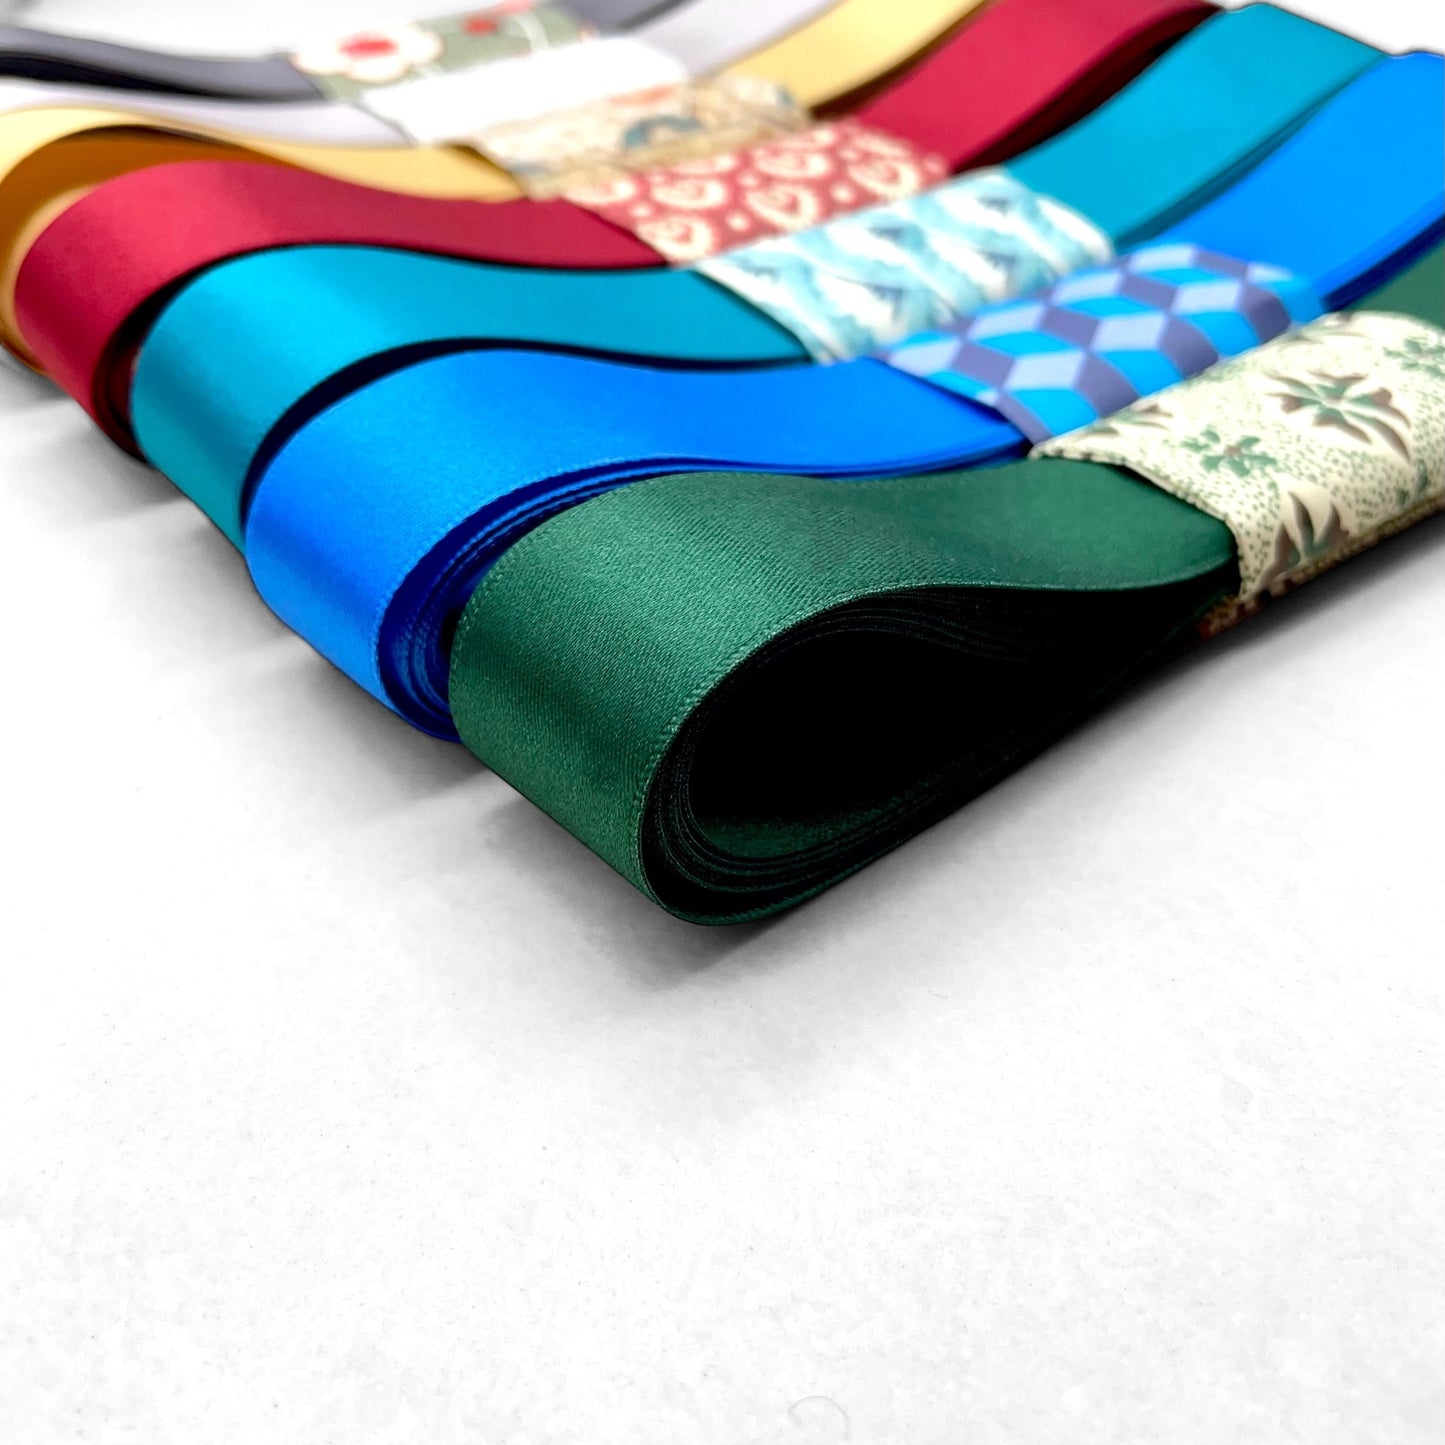 Satin ribbon 25mm wide and 5 metres long, presented with a patterned paper band. colour - forest green